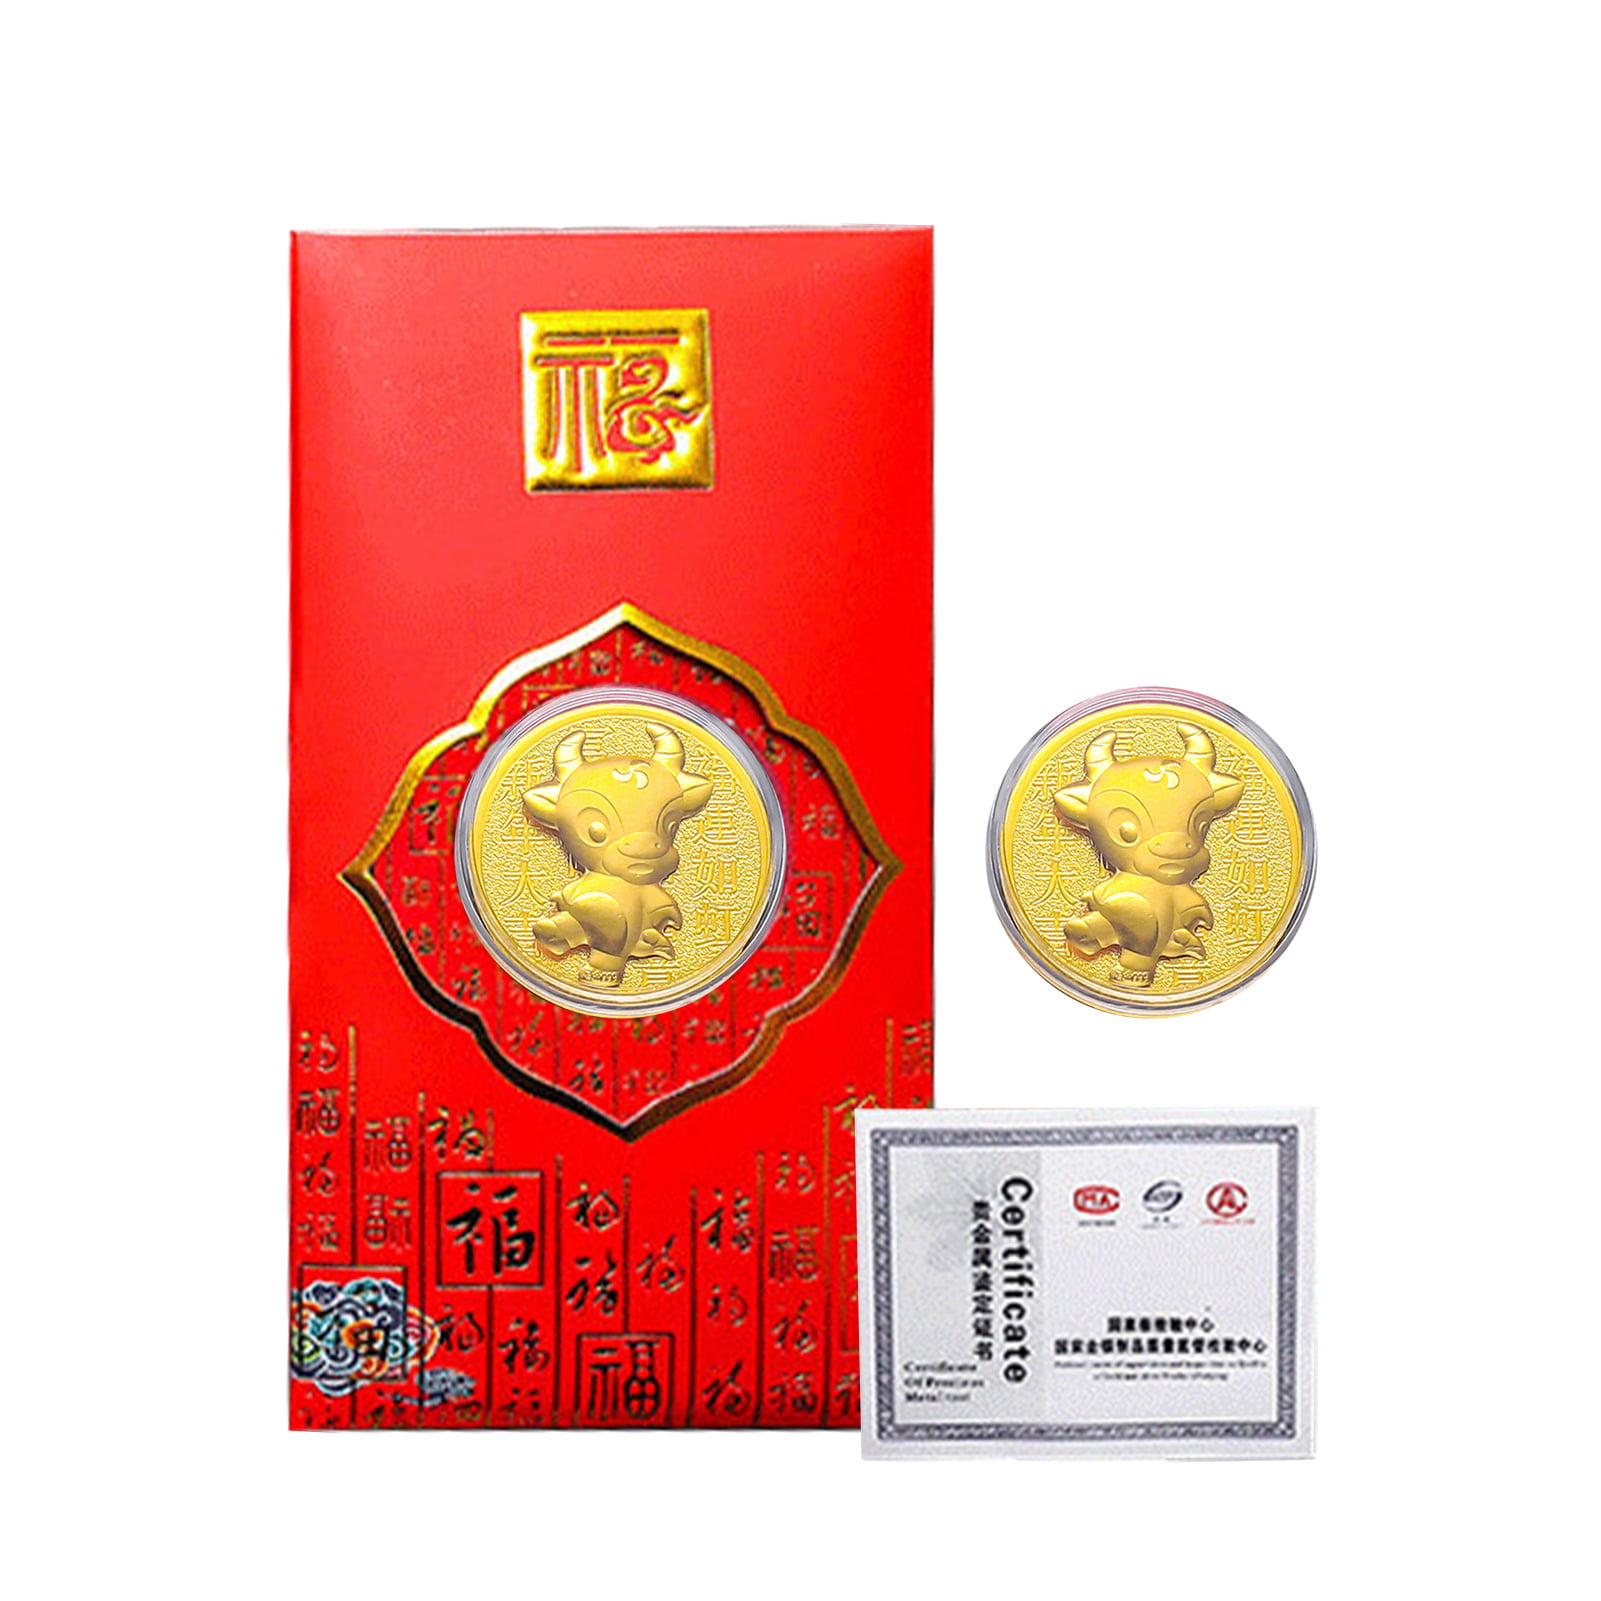 2021 Year Of Ox Coin Happy New Year Gift Commemorative Gold Coin Chinese Zodiac